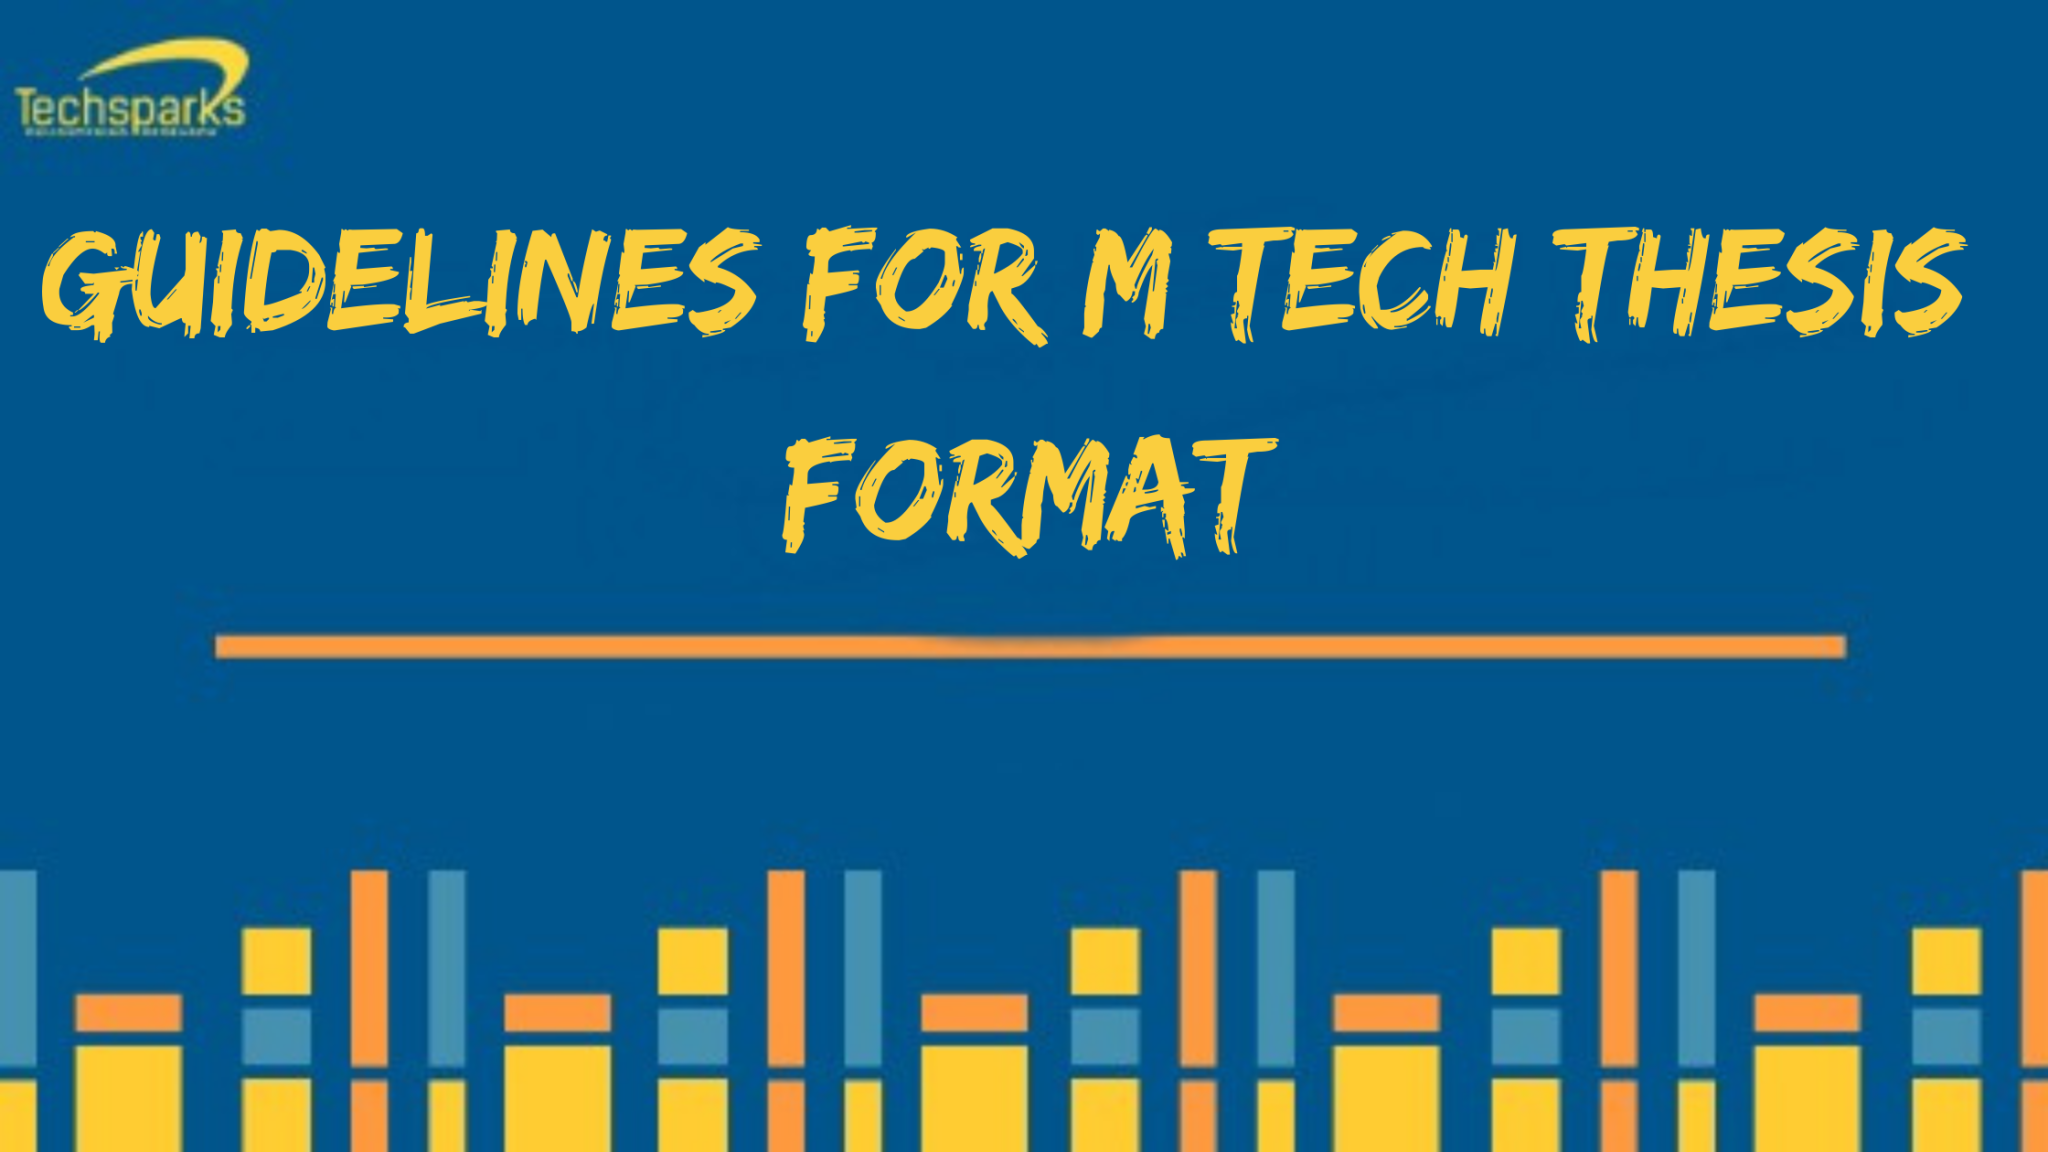 m tech thesis ppt download